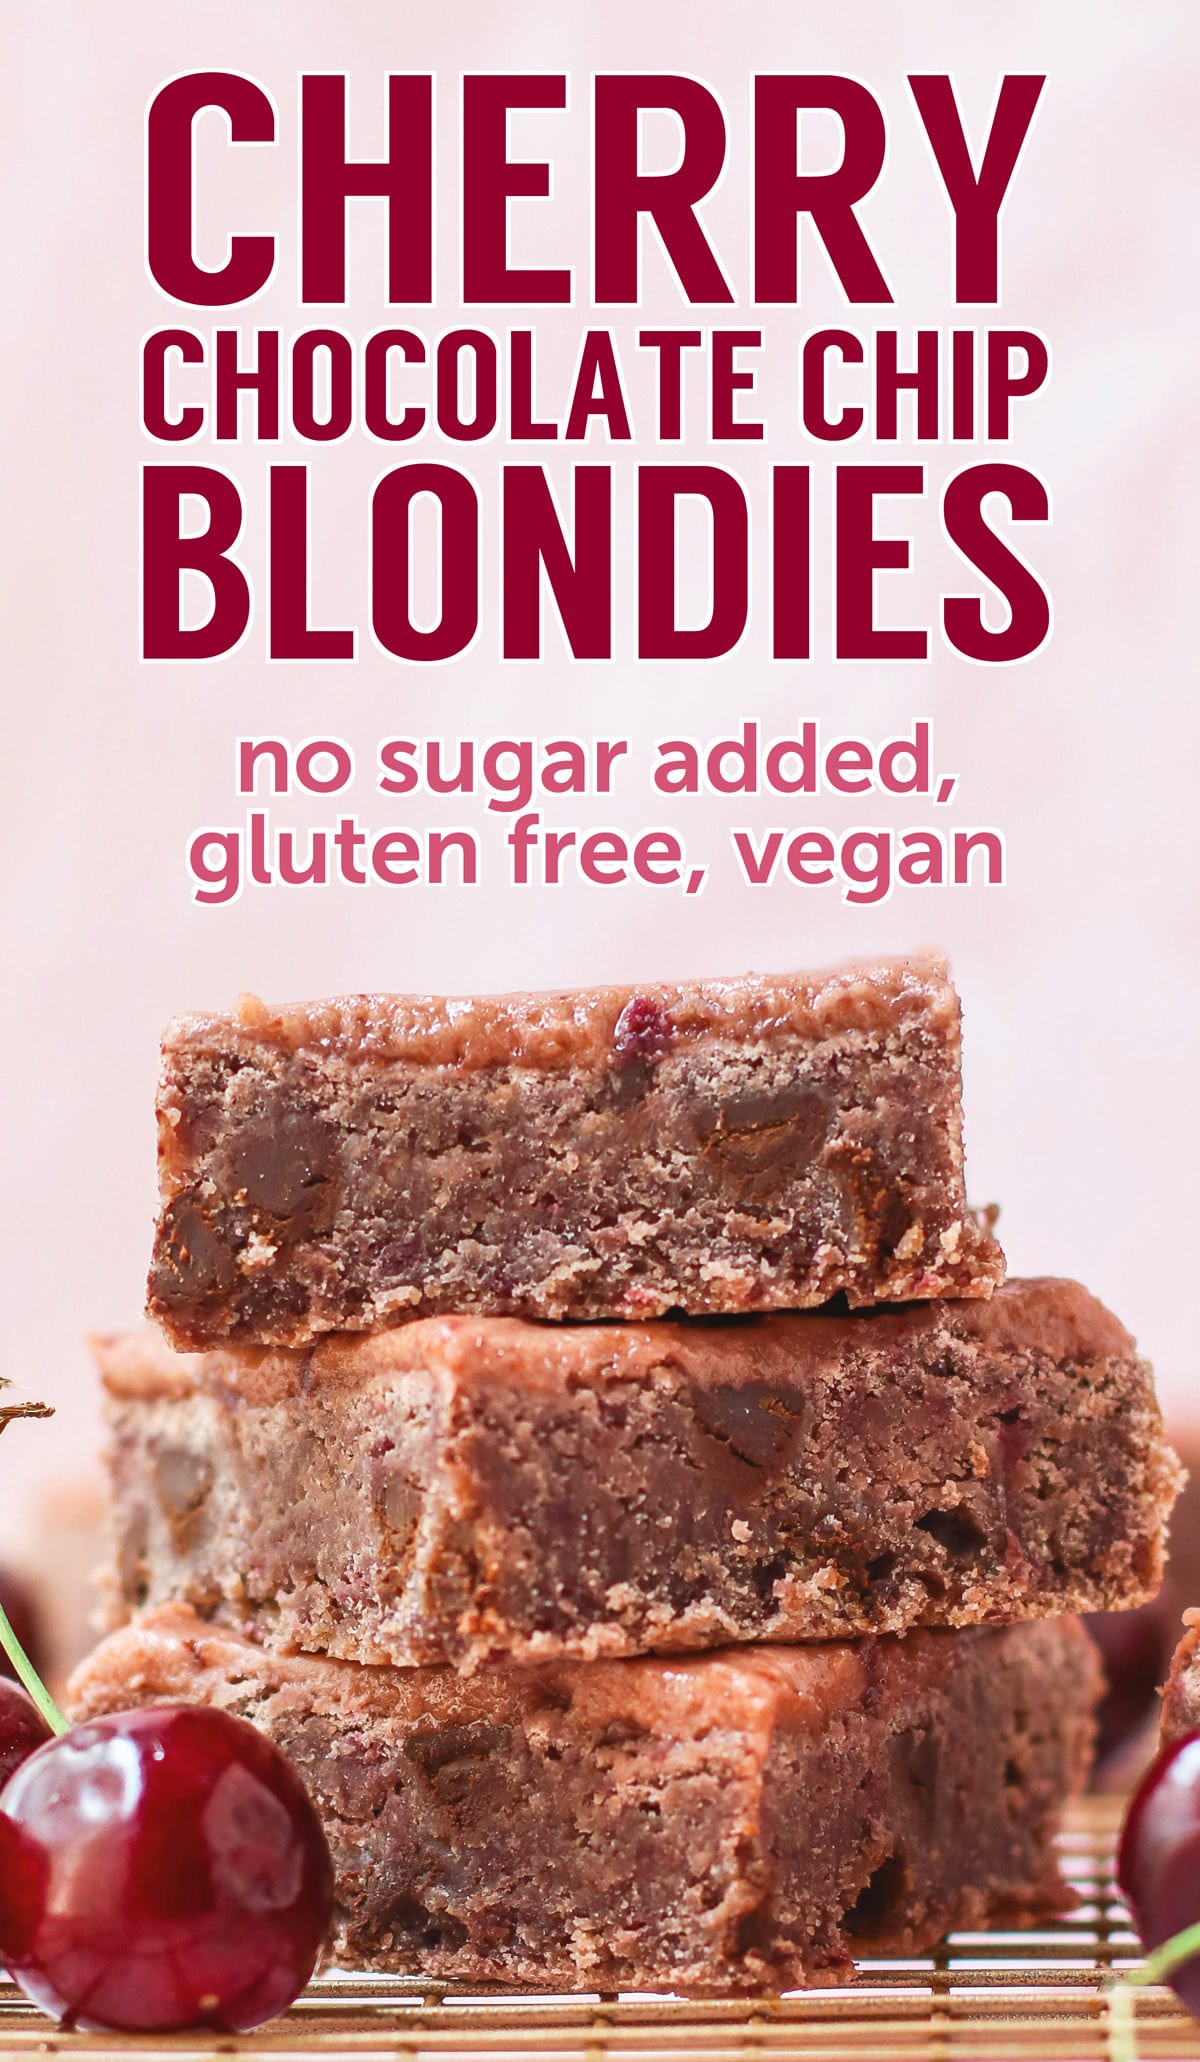 These healthy Cherry Chocolate Chip Blondies are dense, fudgy, and packed with chocolate chips! You'd never know they're made without any added sugar, butter, or flour! Oh yes, these are sugar free, gluten free, dairy free, and vegan.